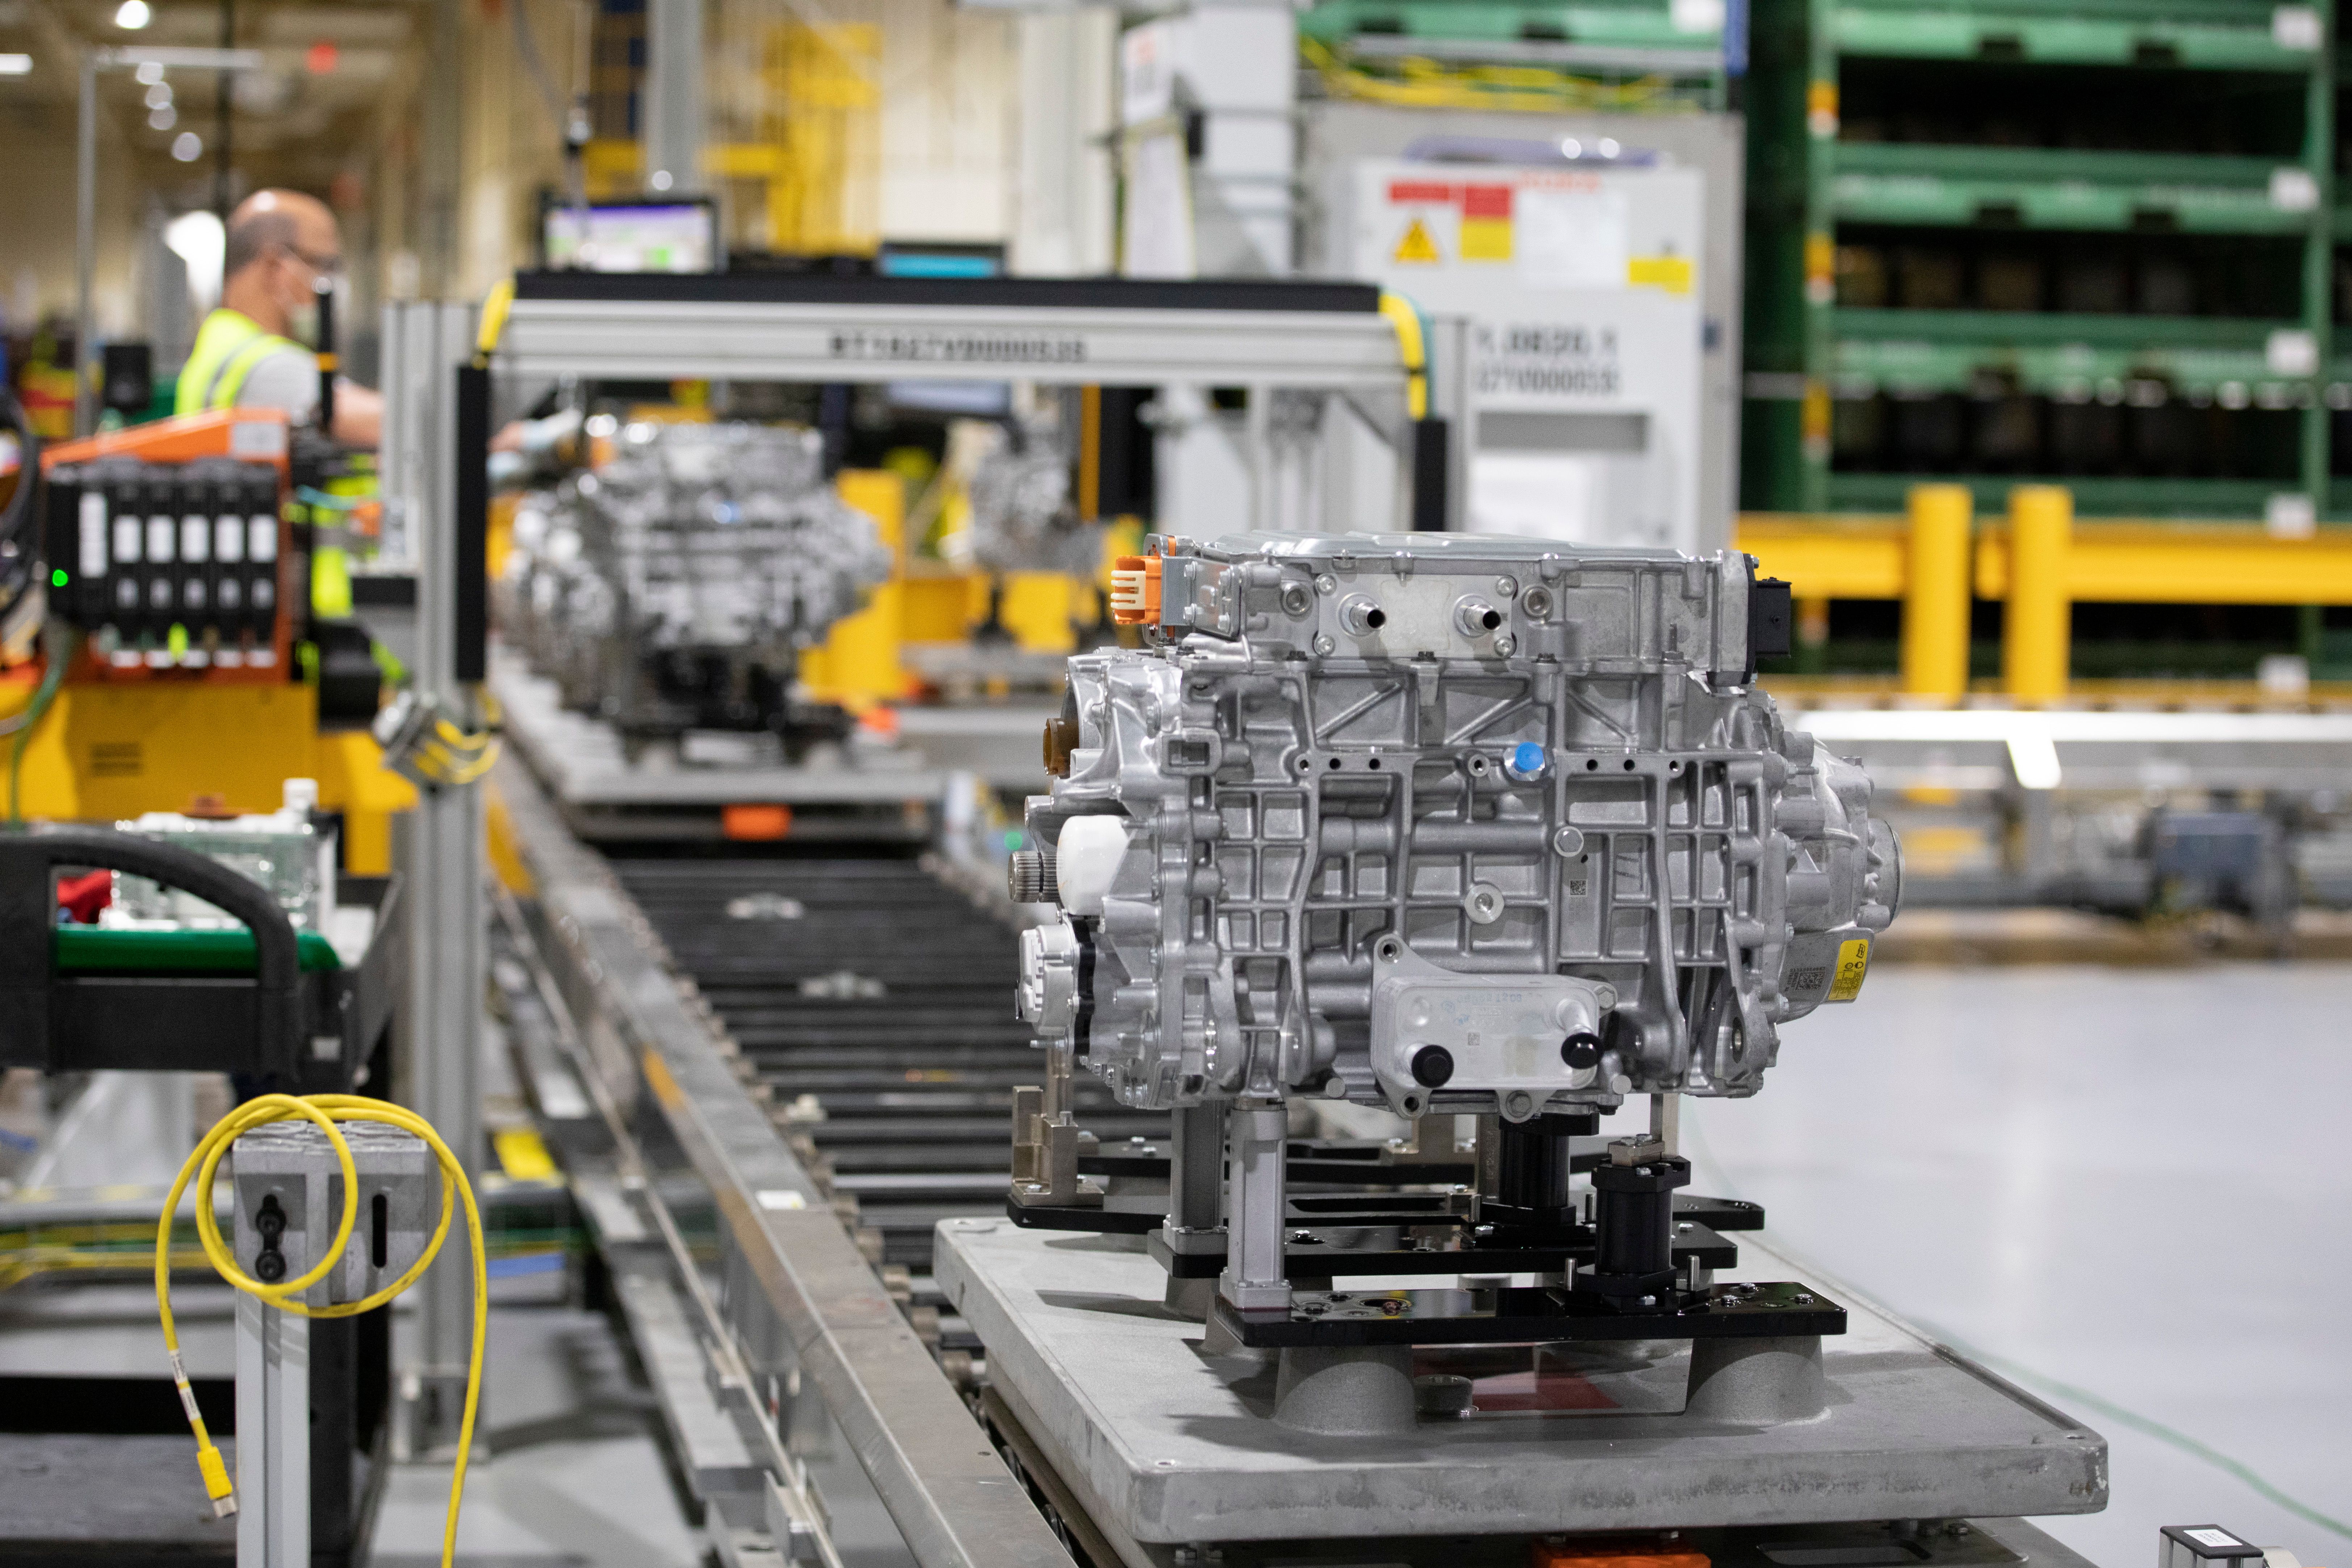 Ford's new electric powertrains built at Van Dyke Electric powertrain center